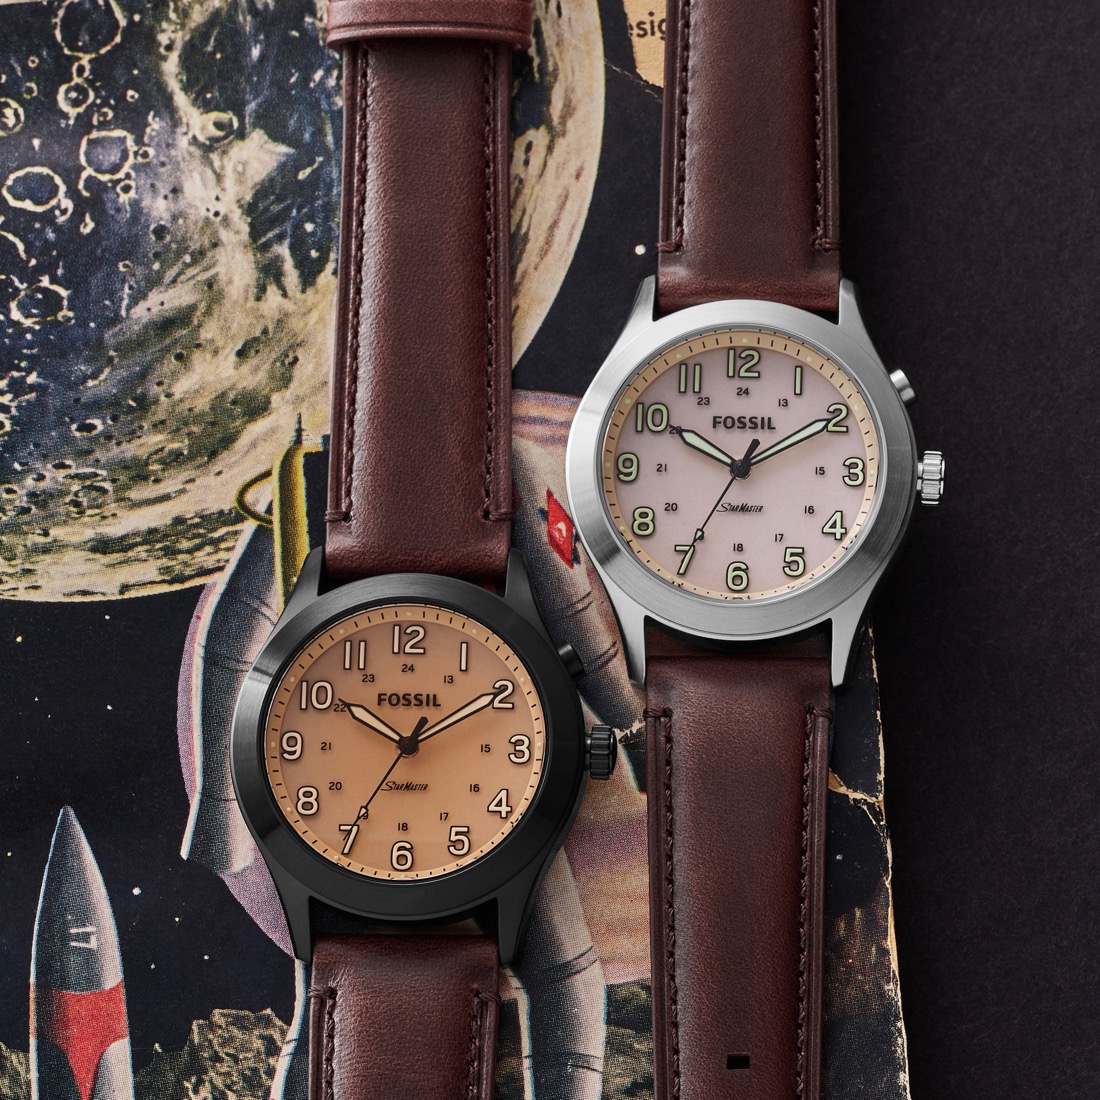 Фото часов Fossil Archival Series Starmaster LE1084